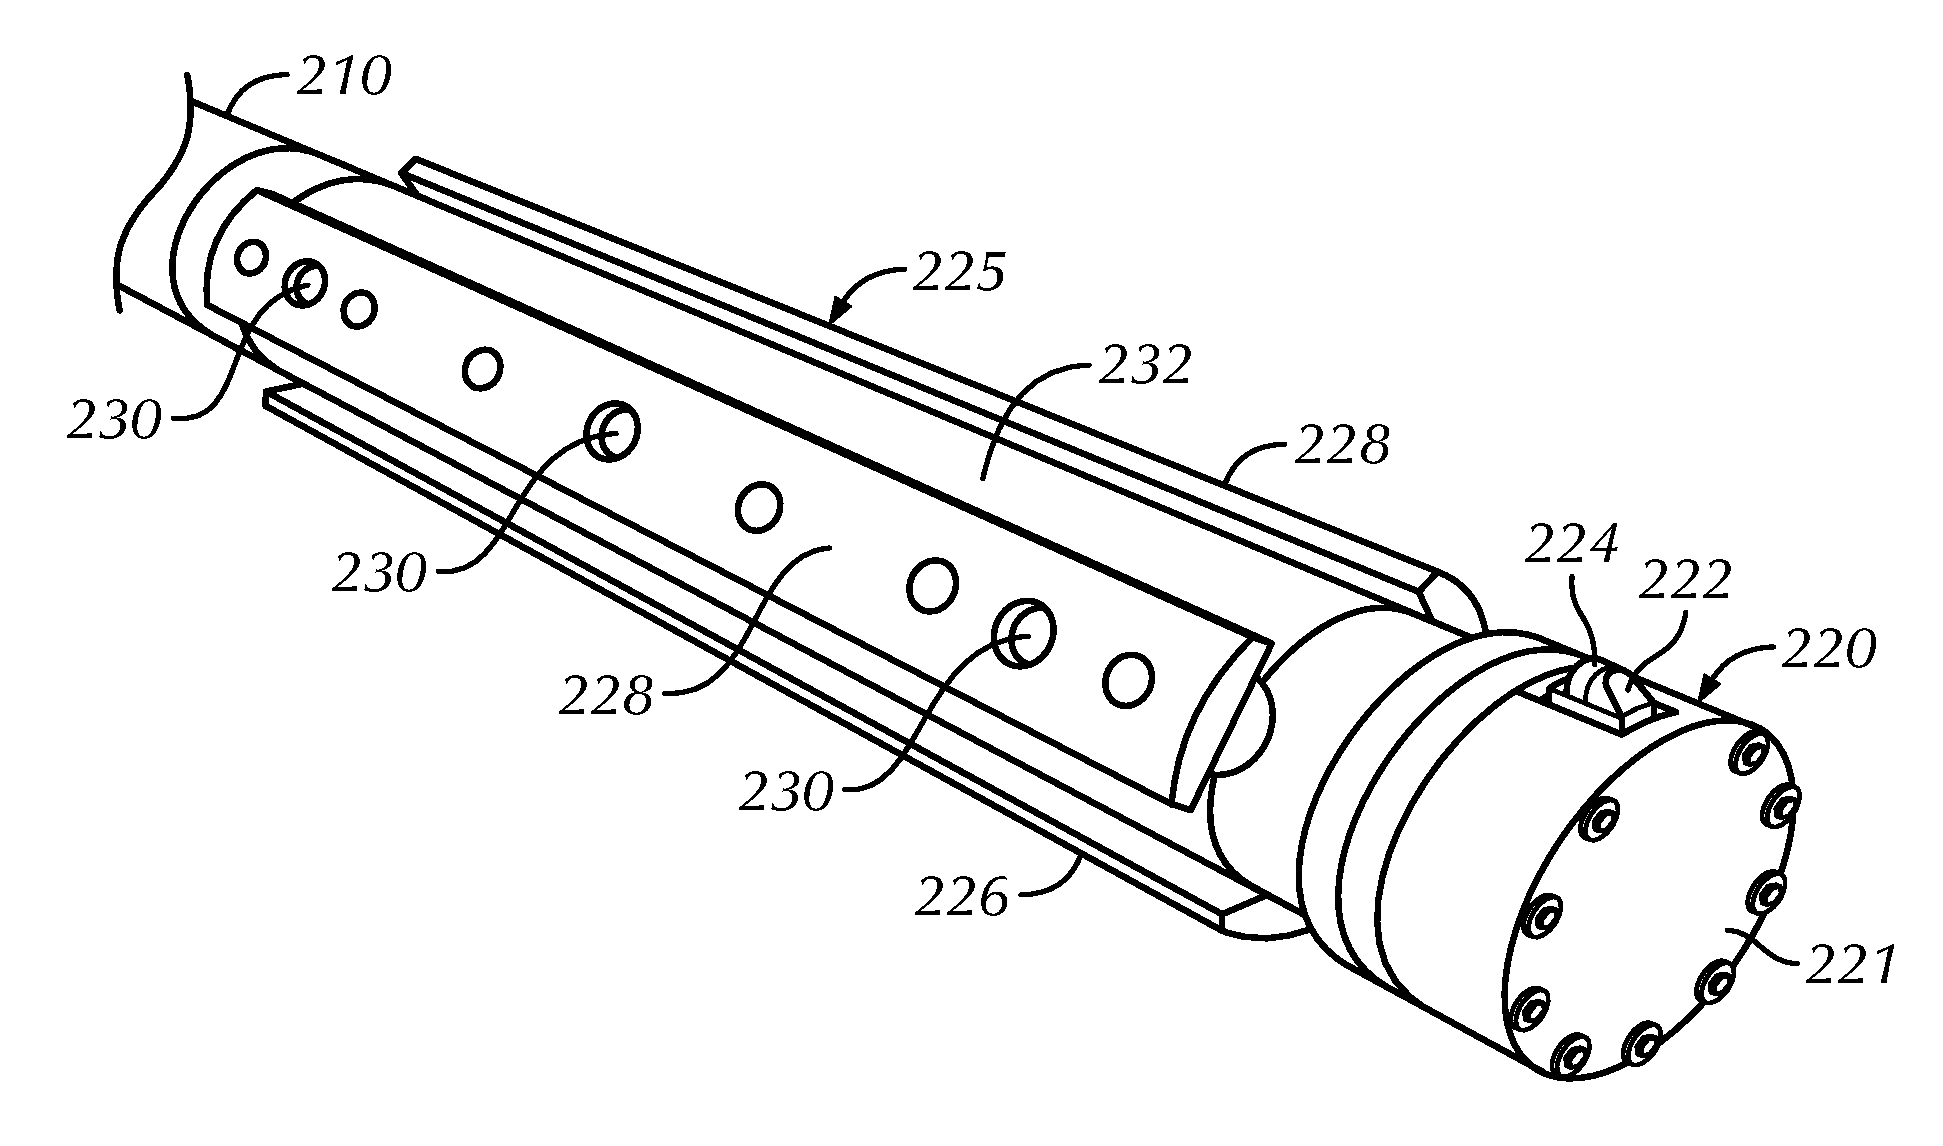 Machining apparatus for long tube lengths and related methods